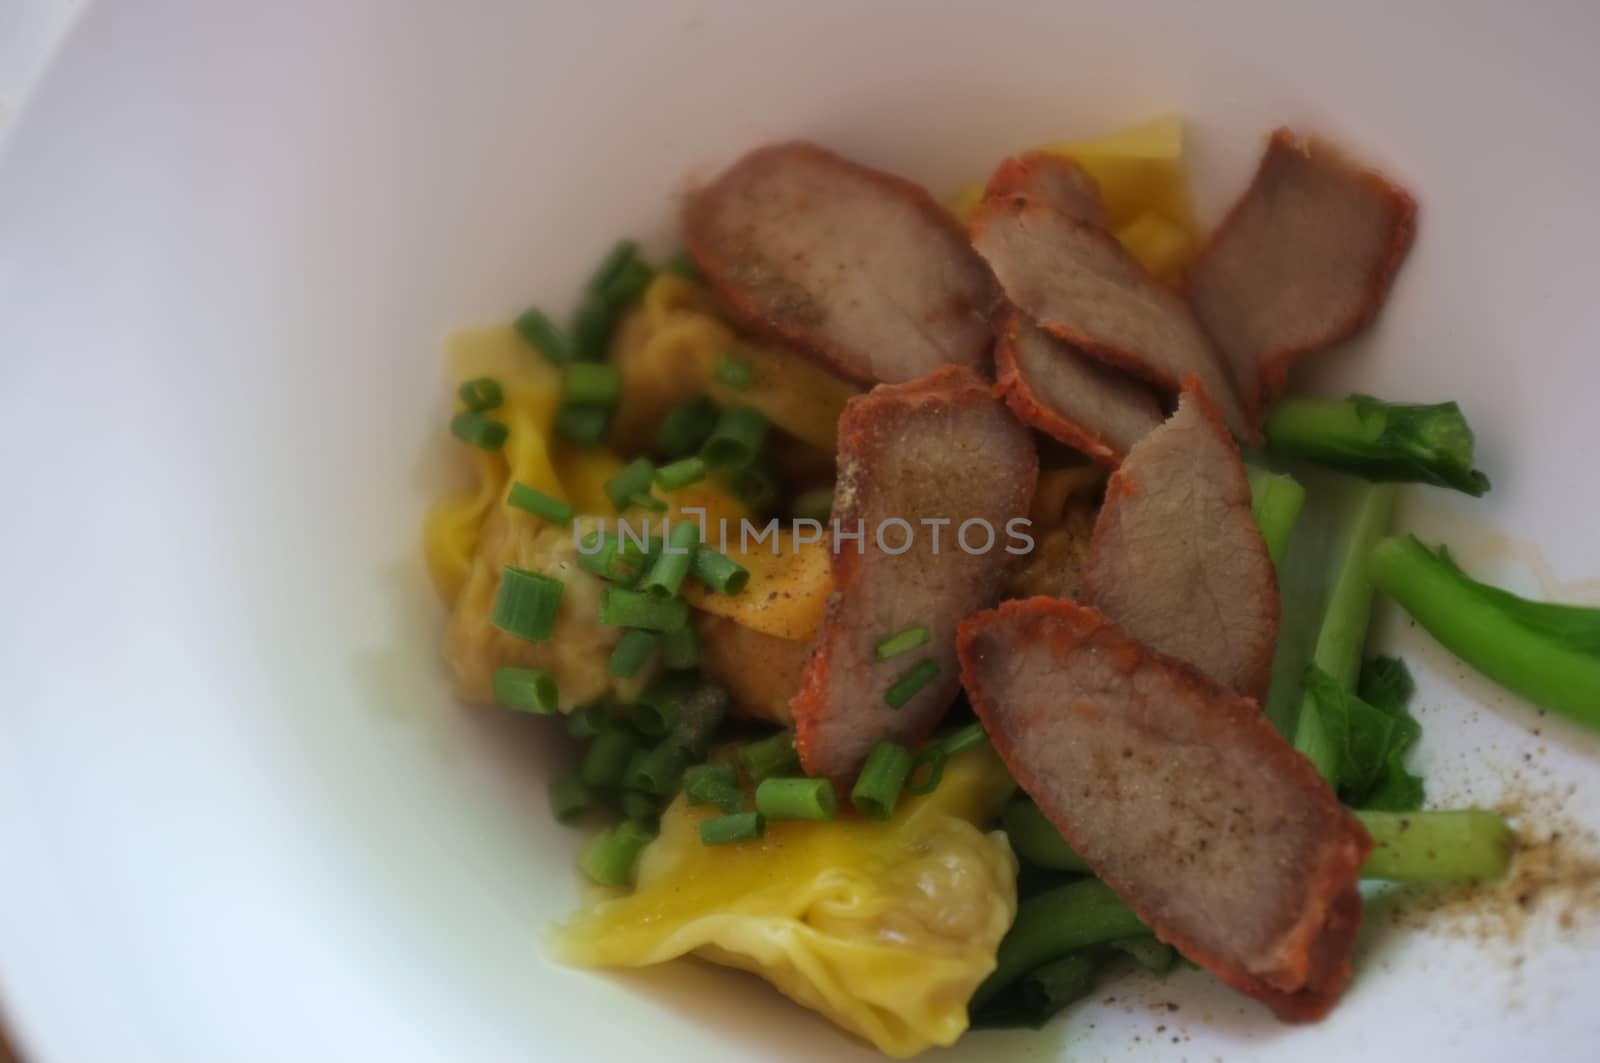 Wantan egg noodles and sliced roasted red pork . Asian street food   by Hepjam